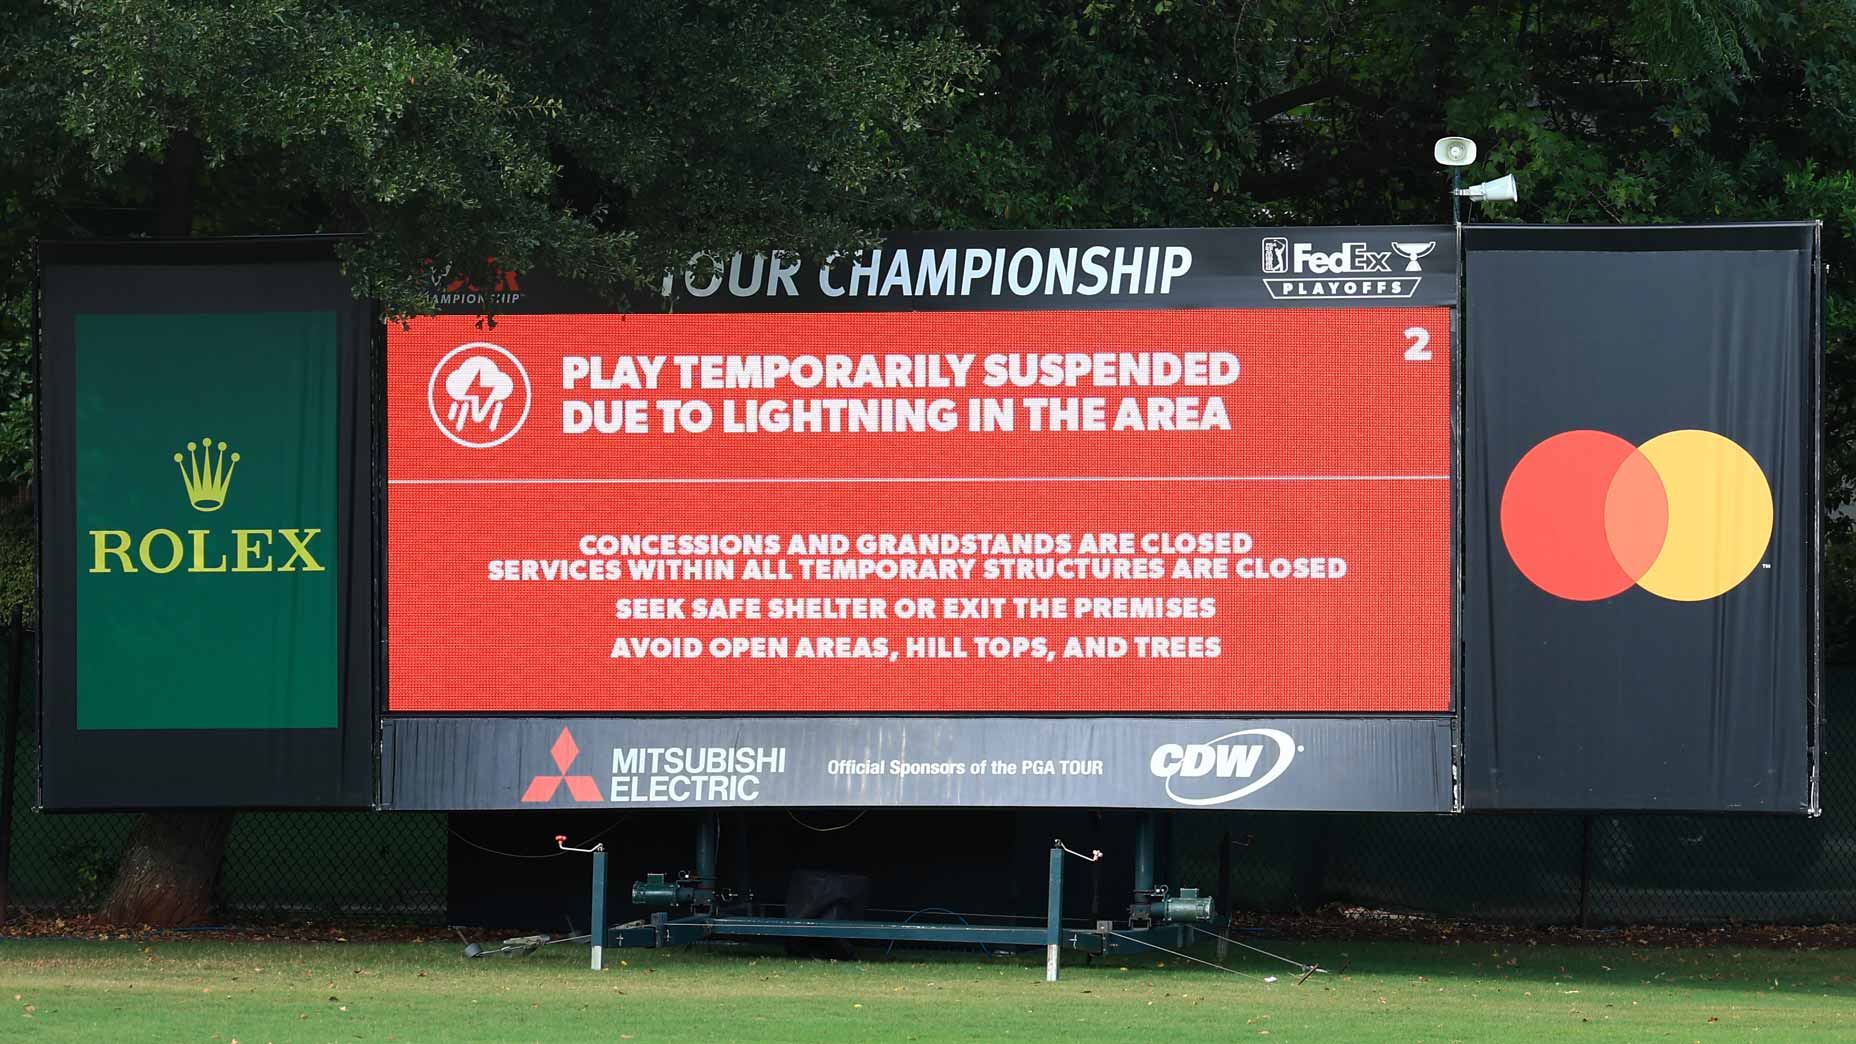 2023 Tour Championship 3rd round suspended due to inclement weather